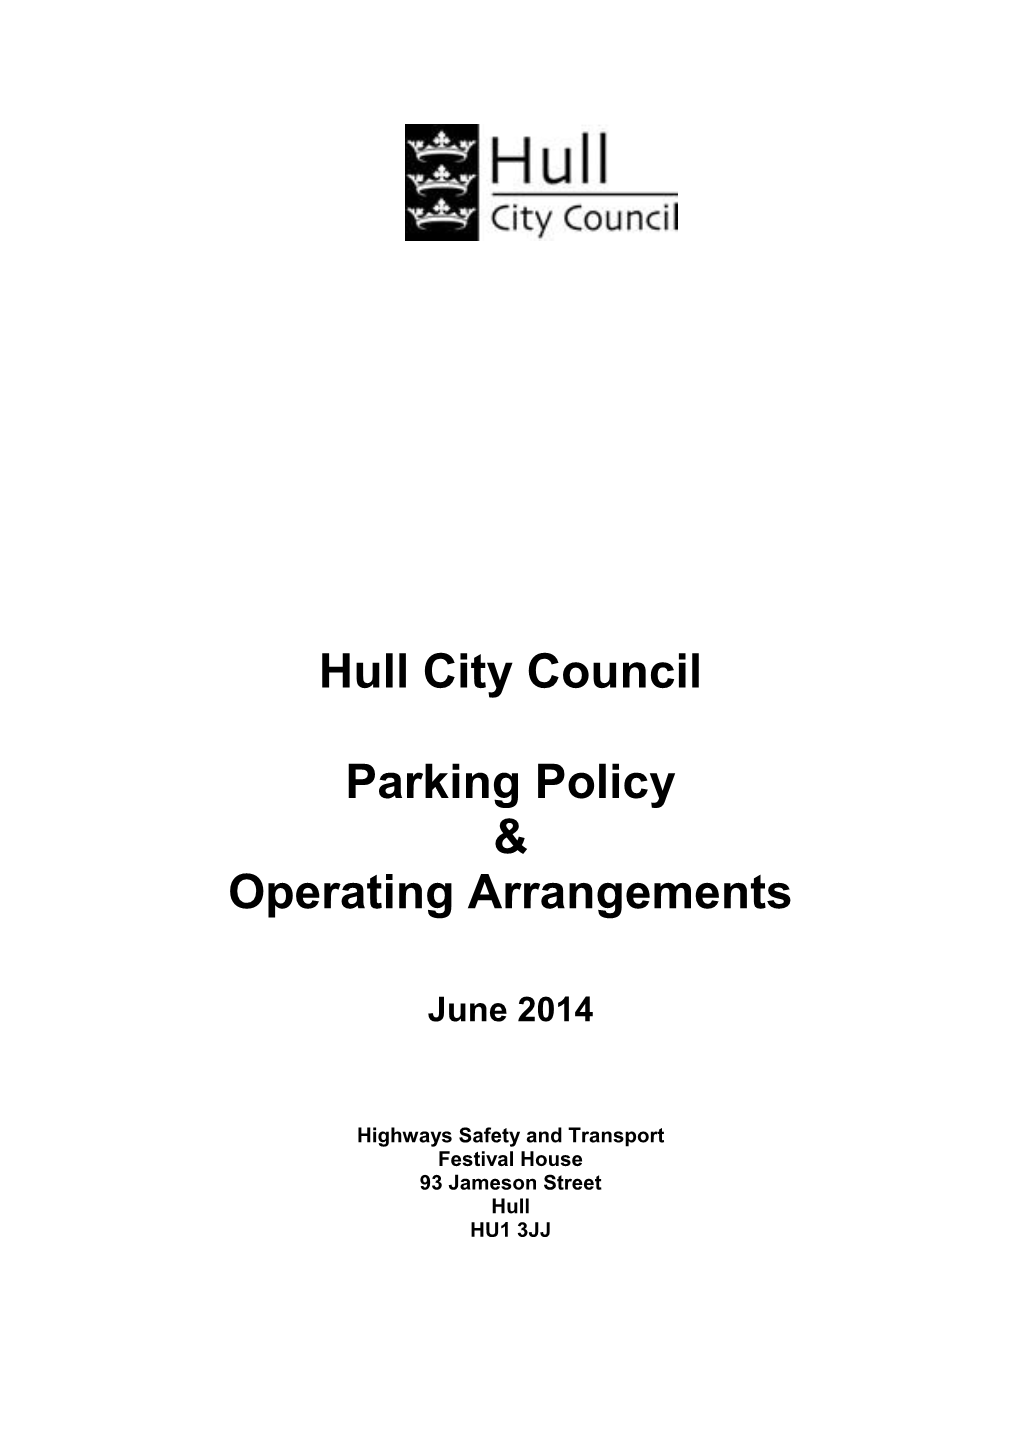 Hull City Council Parking Policy & Operating Arrangements